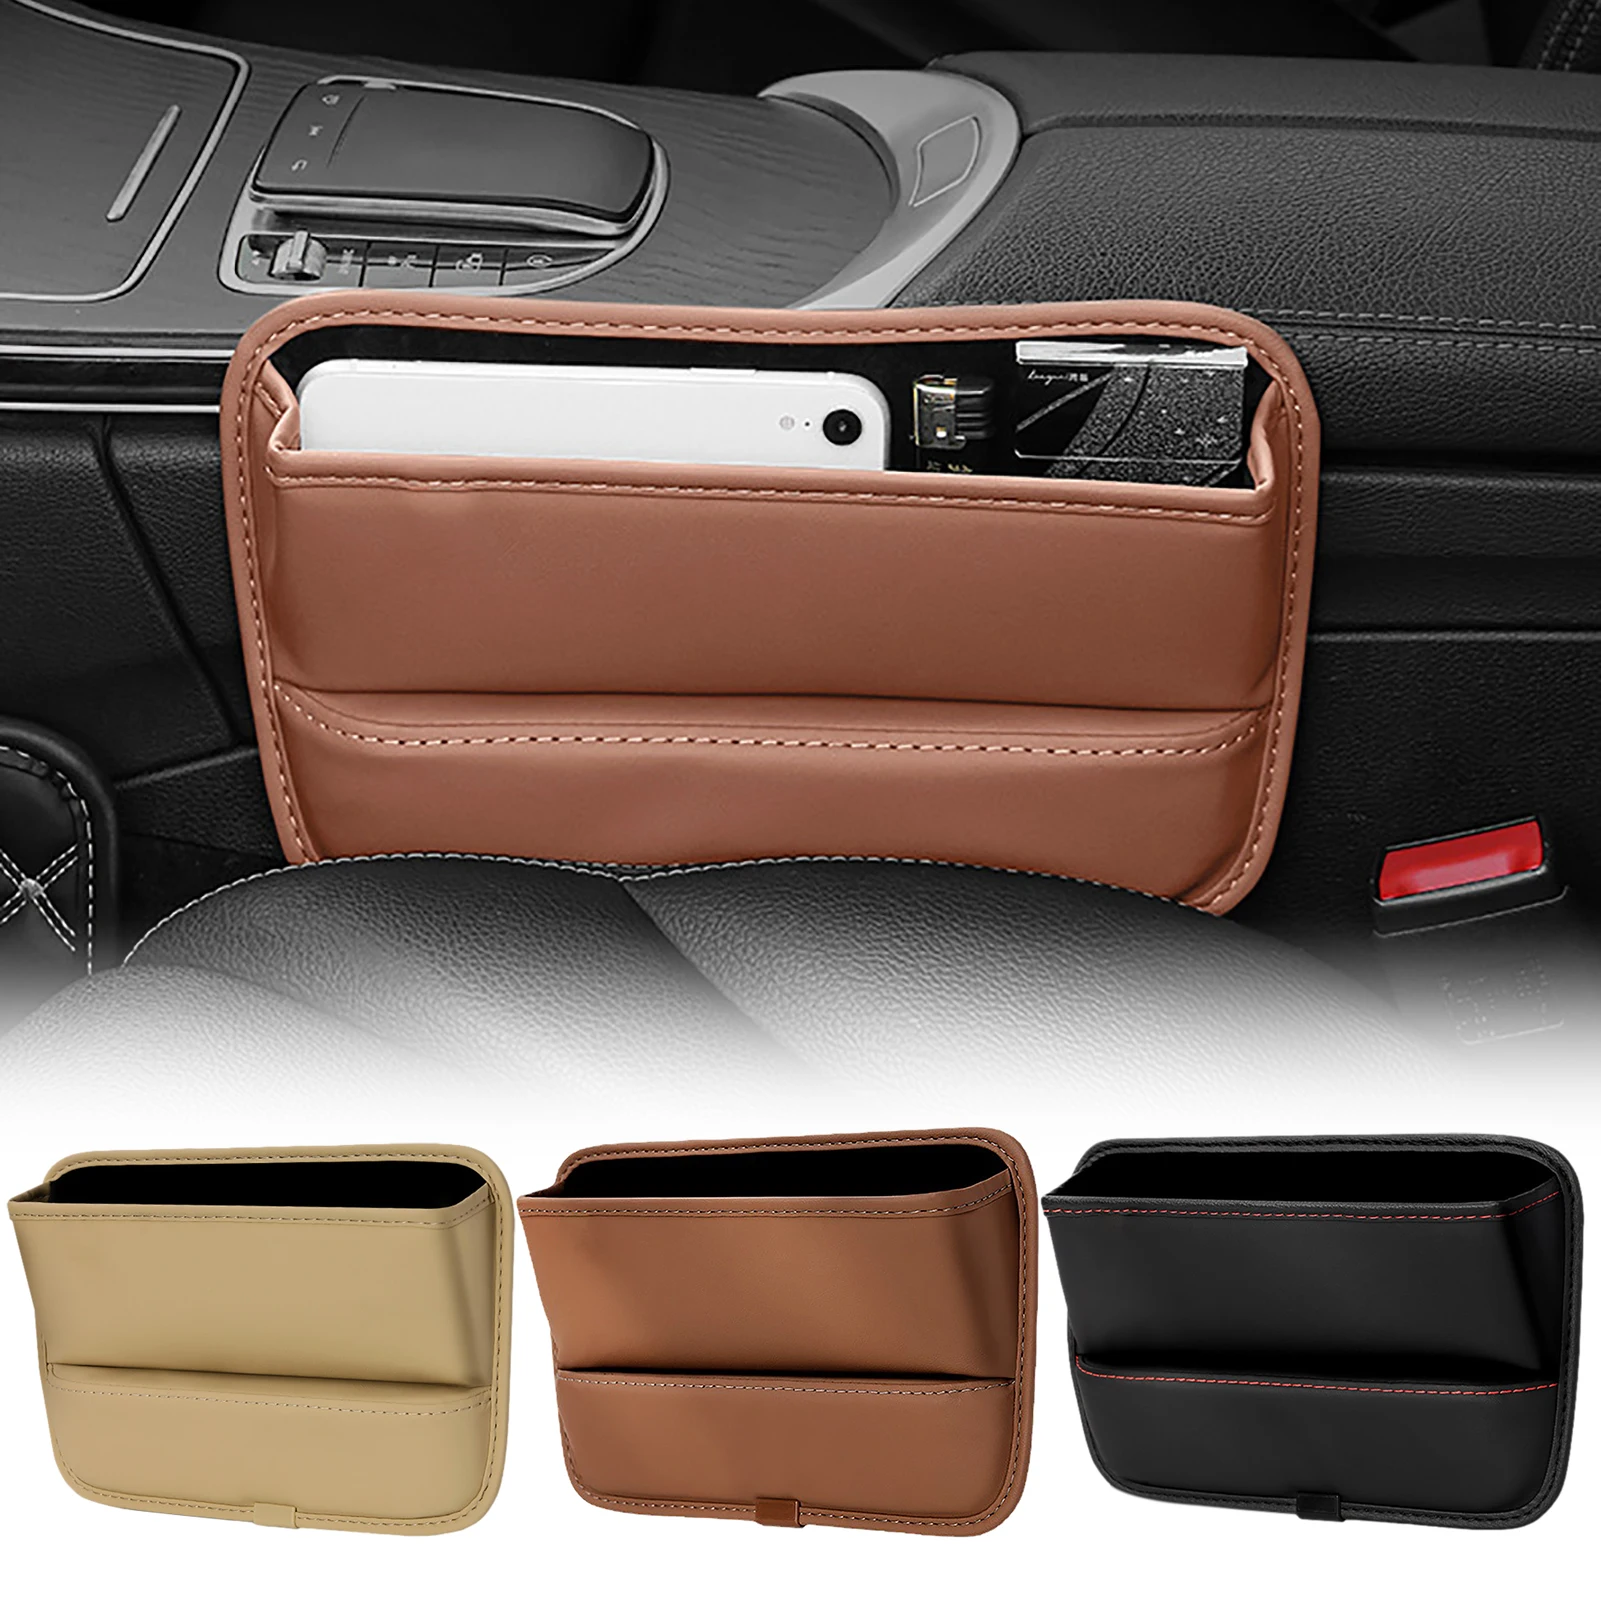 Multifunctional Large Capacity Car Console Side Storage Box for Coins Cards Phone Keys alavisxf xx Car Seat Gap Filler PU Leather Car Seat Pocket Organizer with Cup Holder 